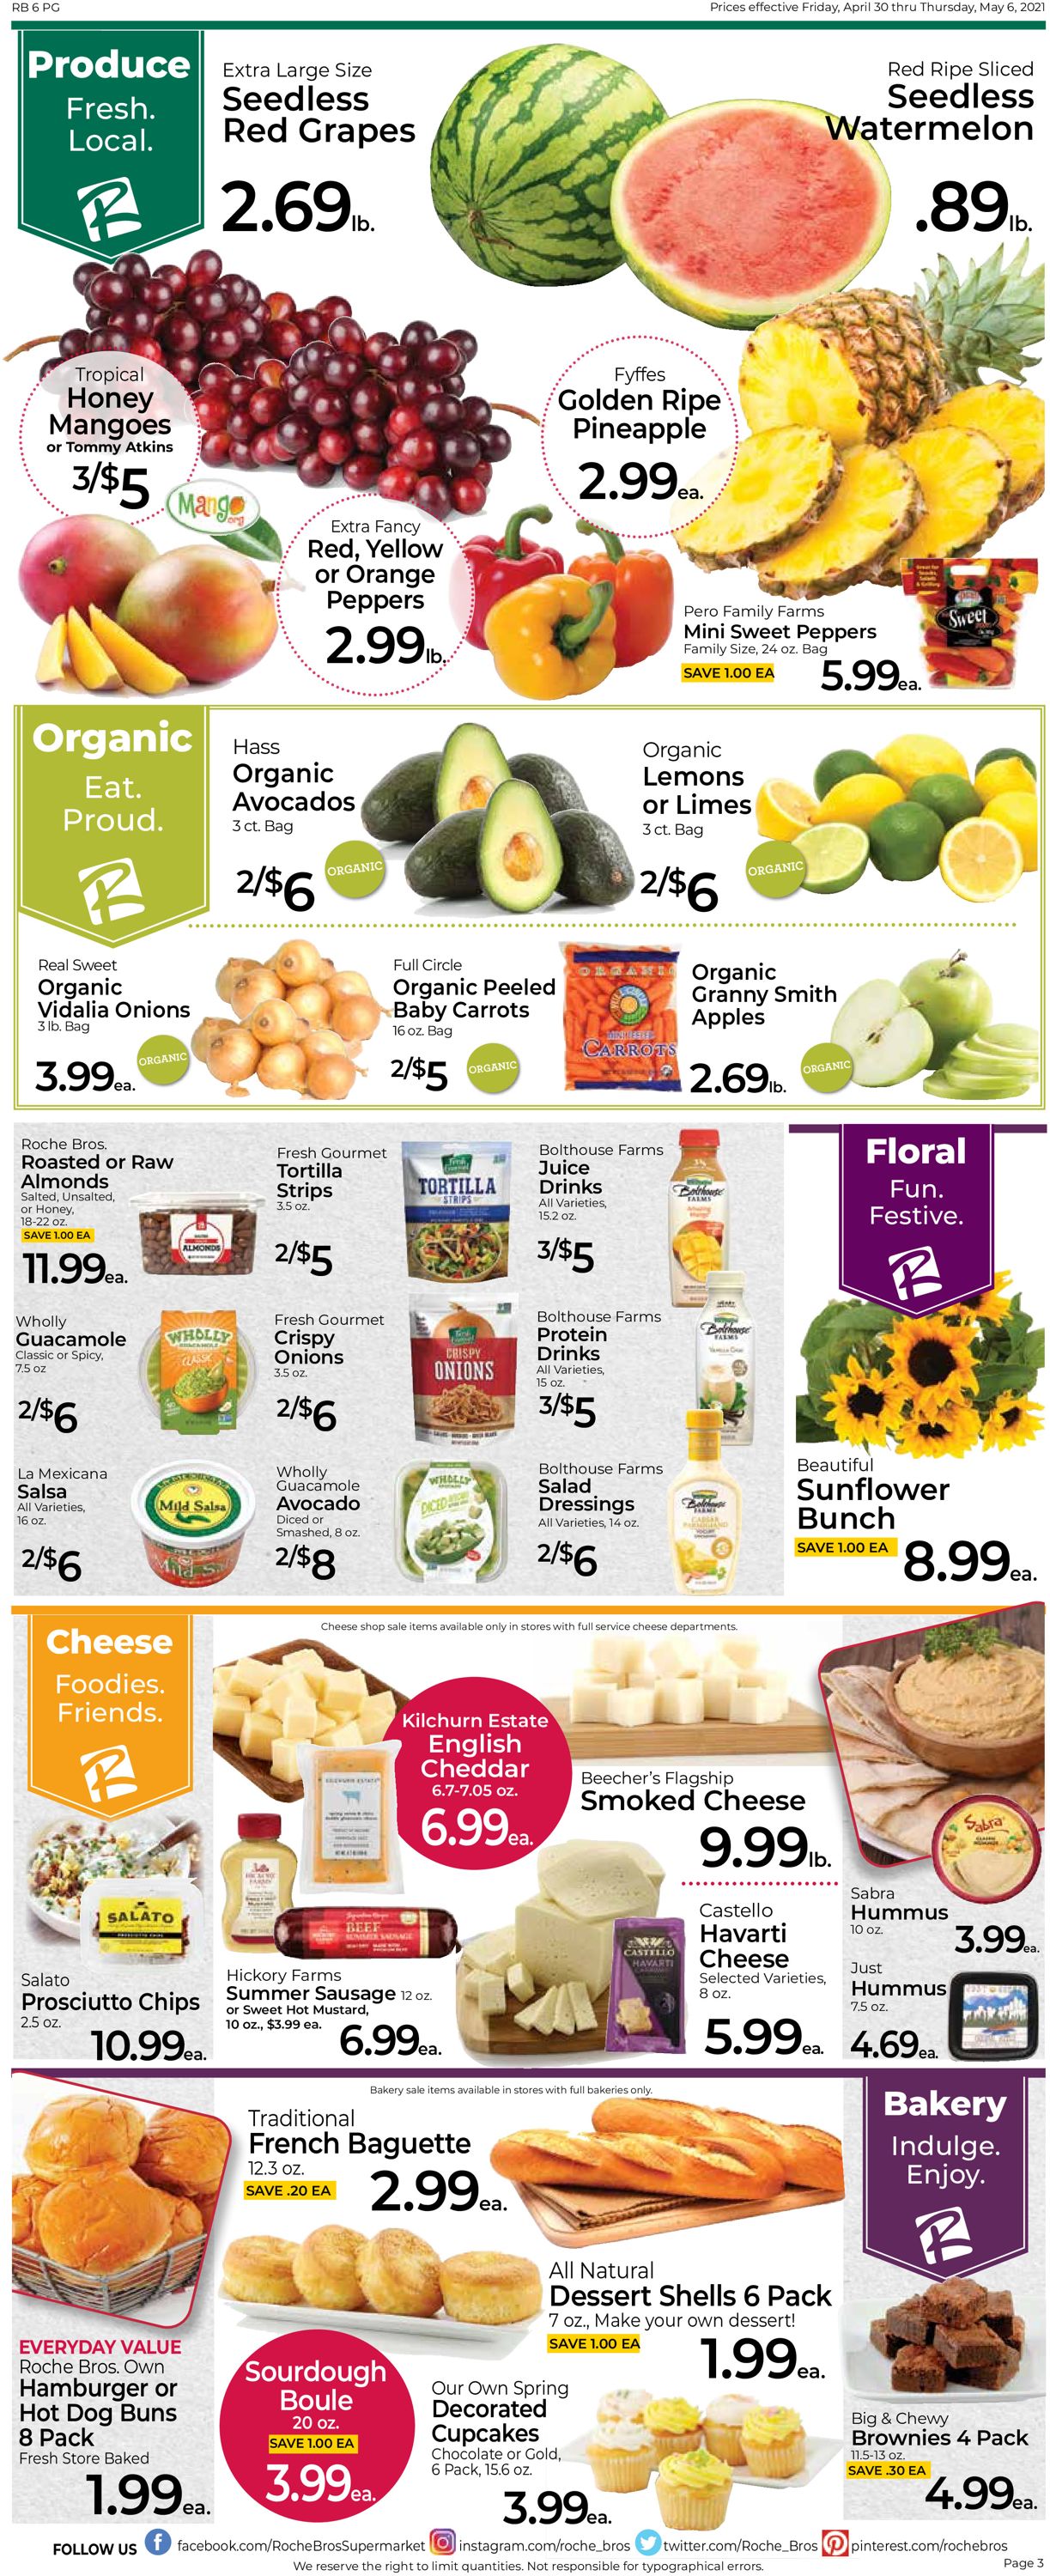 Roche Bros. Supermarkets Ad from 04/30/2021